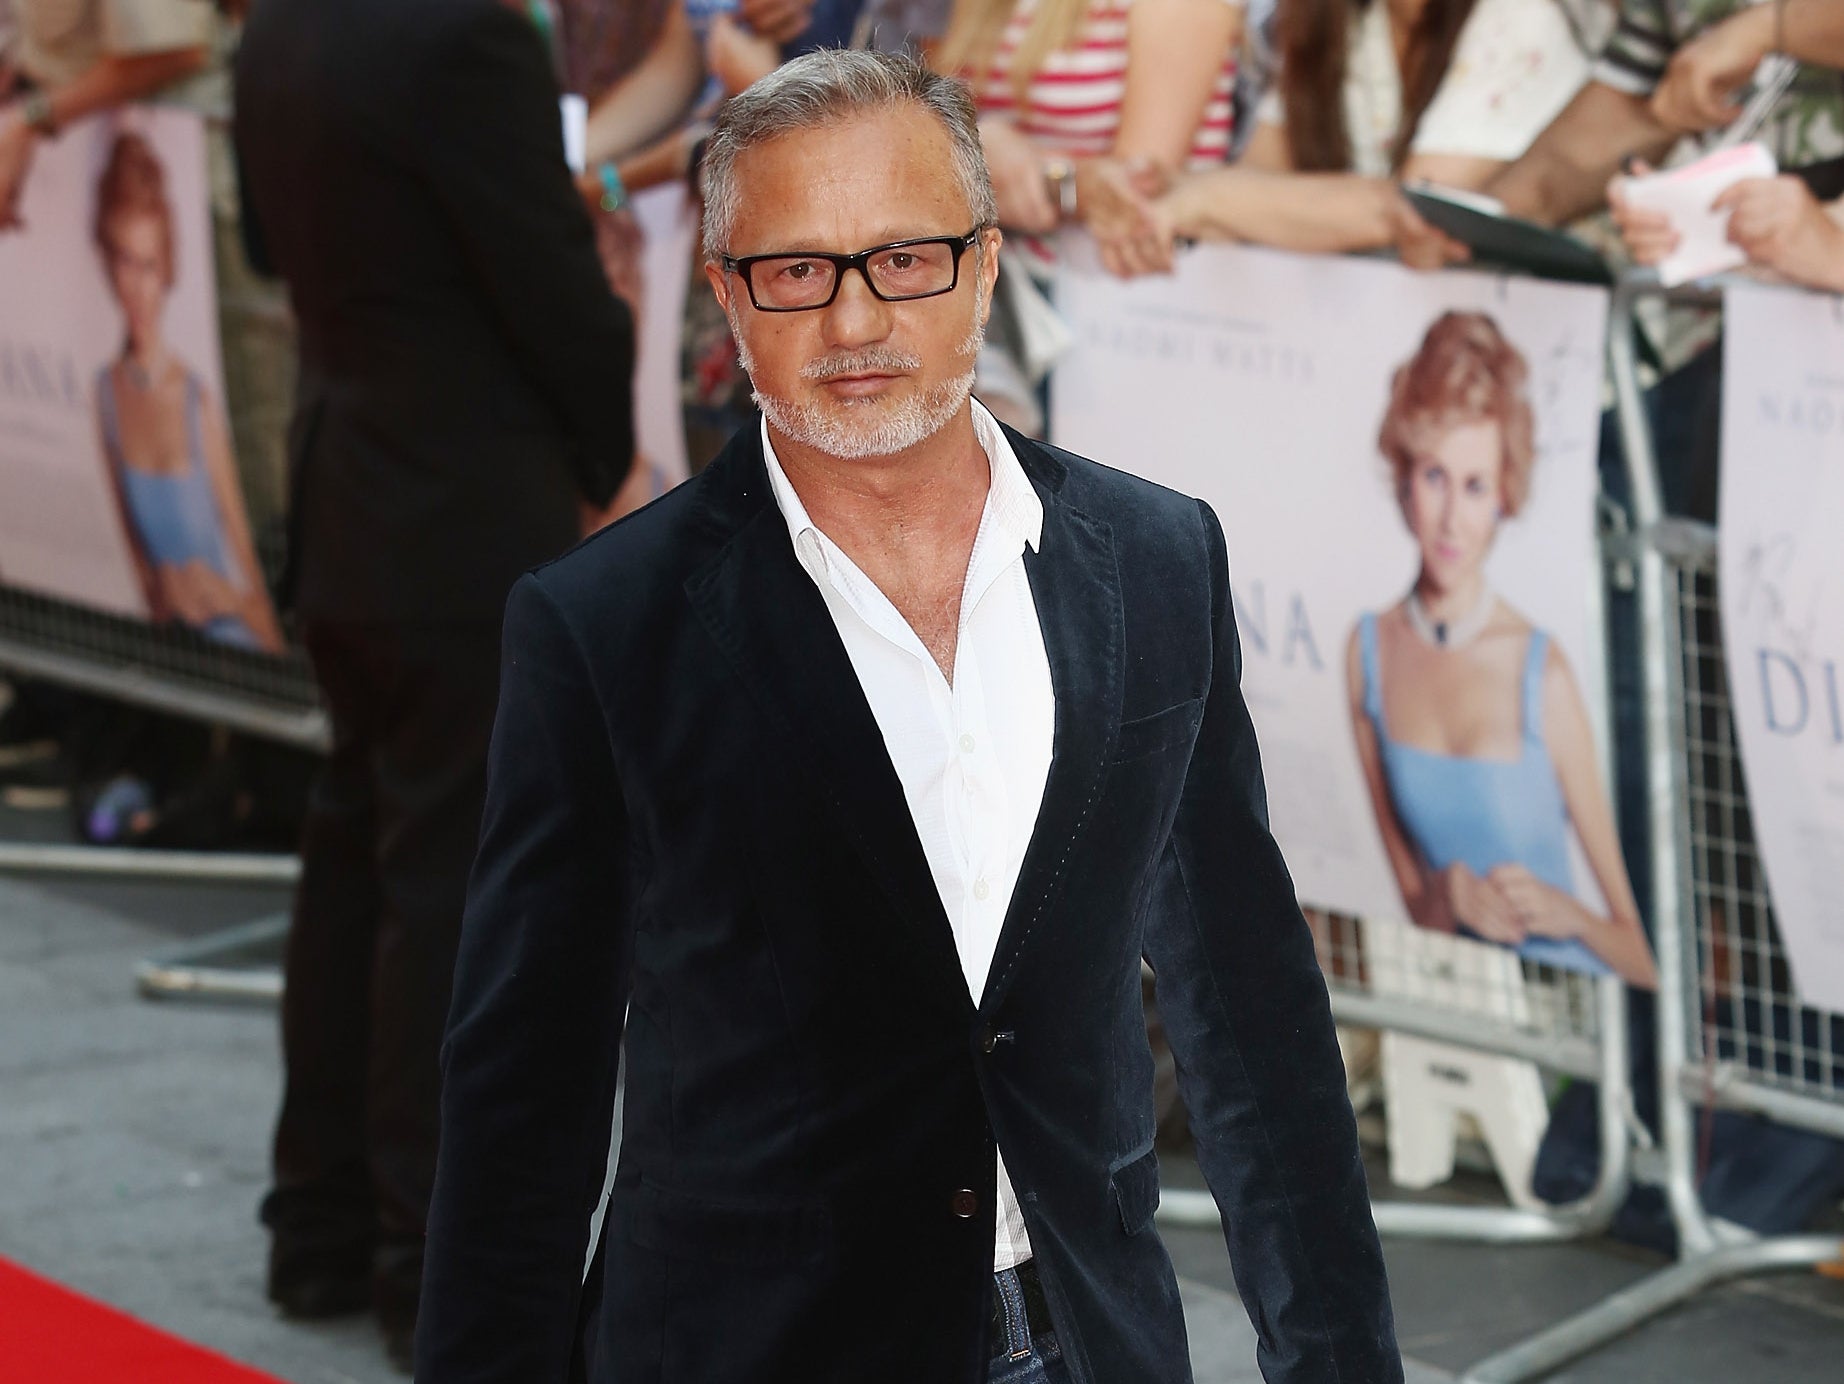 Jacques Azagury attends the World Premiere of "Diana" at Odeon Leicester Square on September 5, 2013